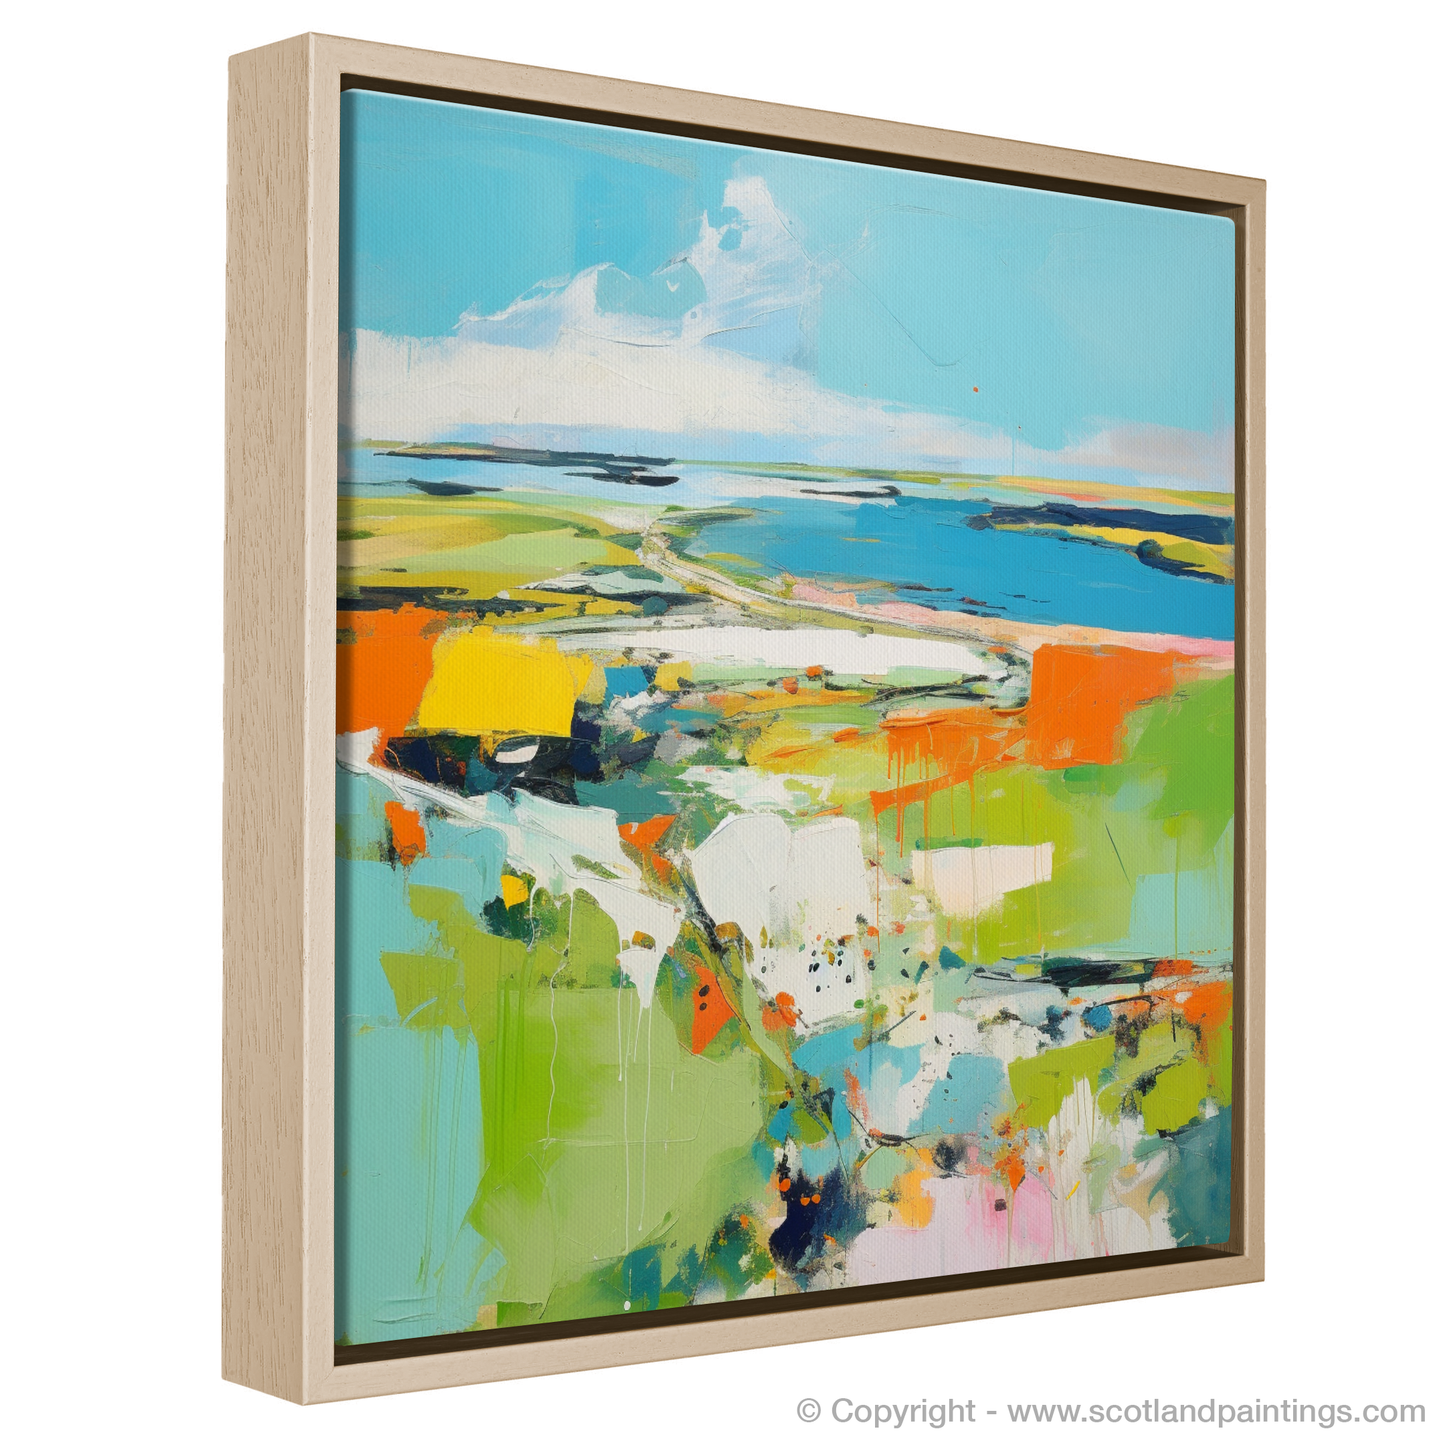 Painting and Art Print of Orkney, North of mainland Scotland in summer entitled "Orkney Summer Reverie".